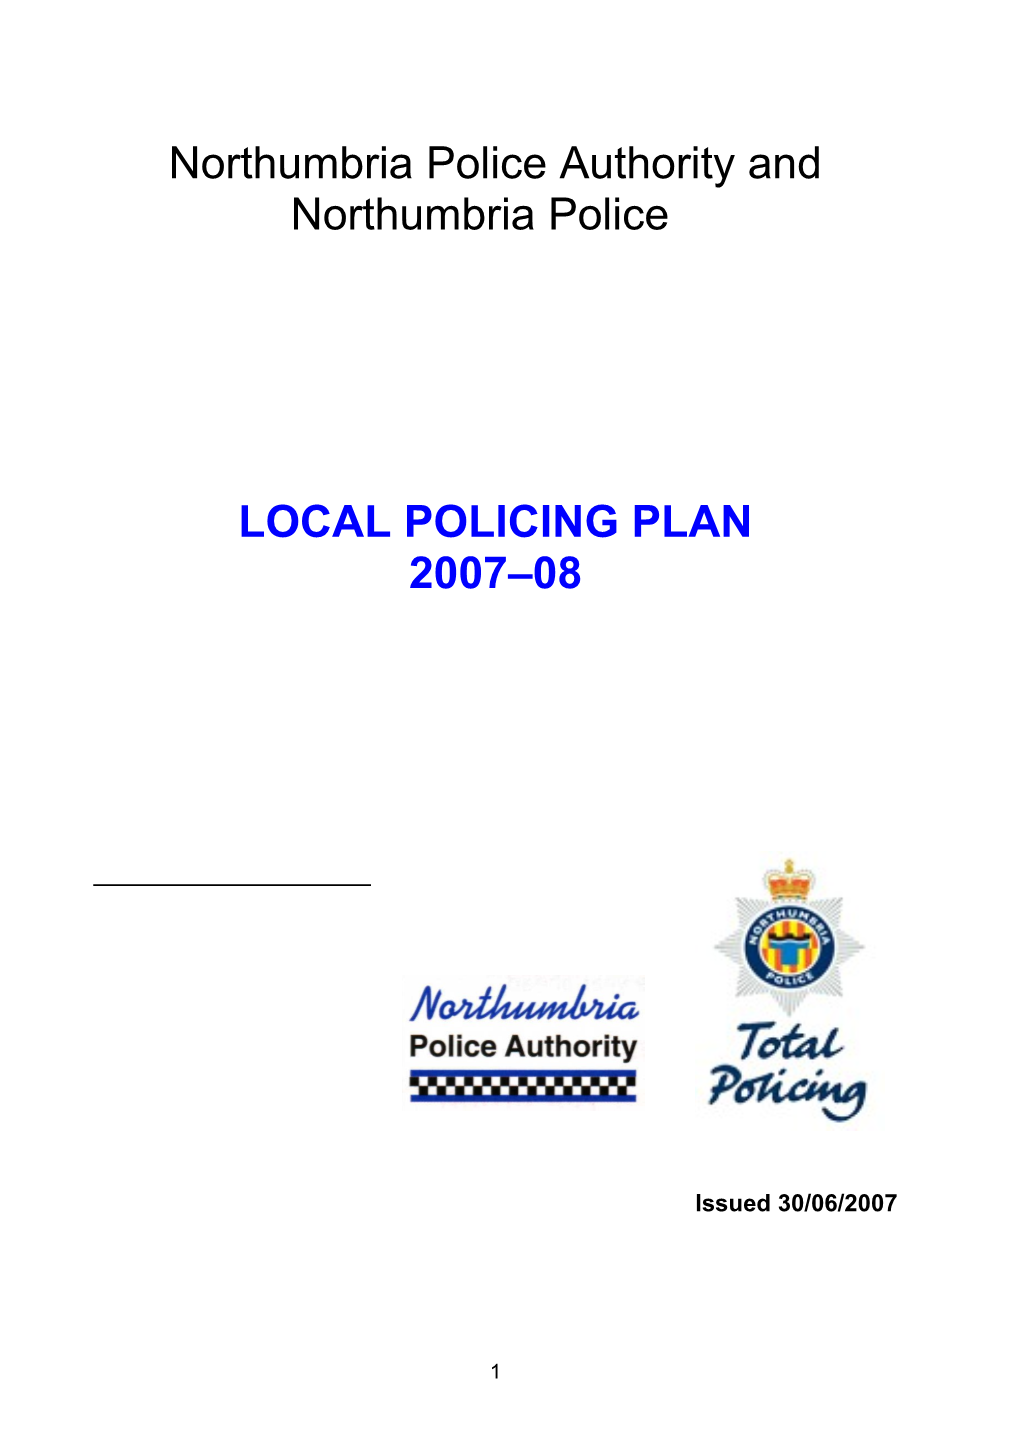 Foreword for Local Policing Plan 2007